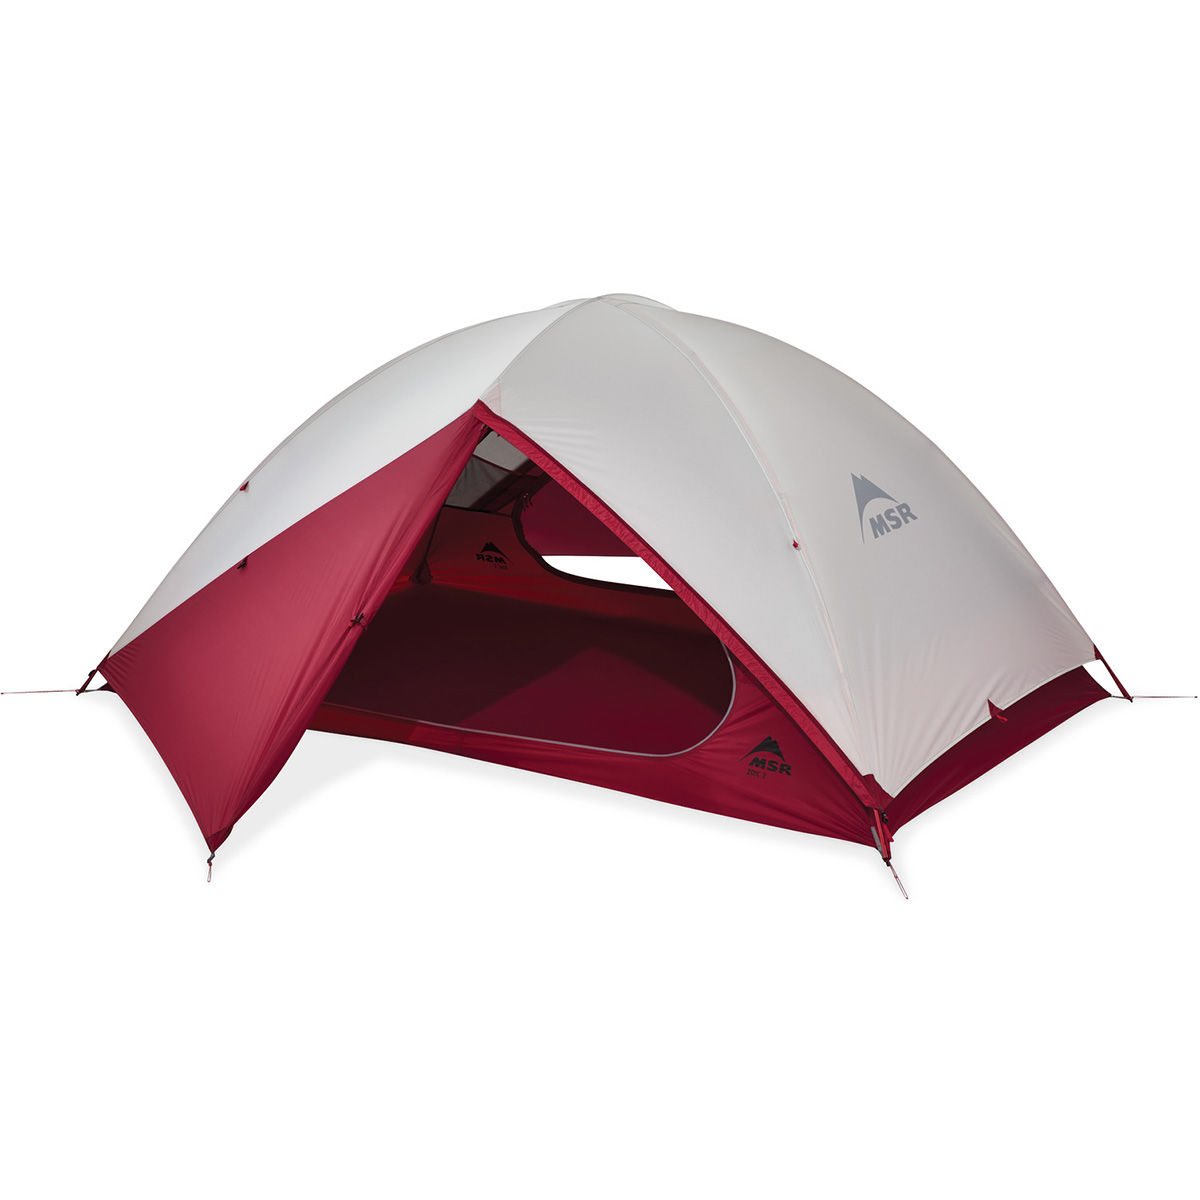 msr-zoic-2-backpacking-tent-2-people-grey